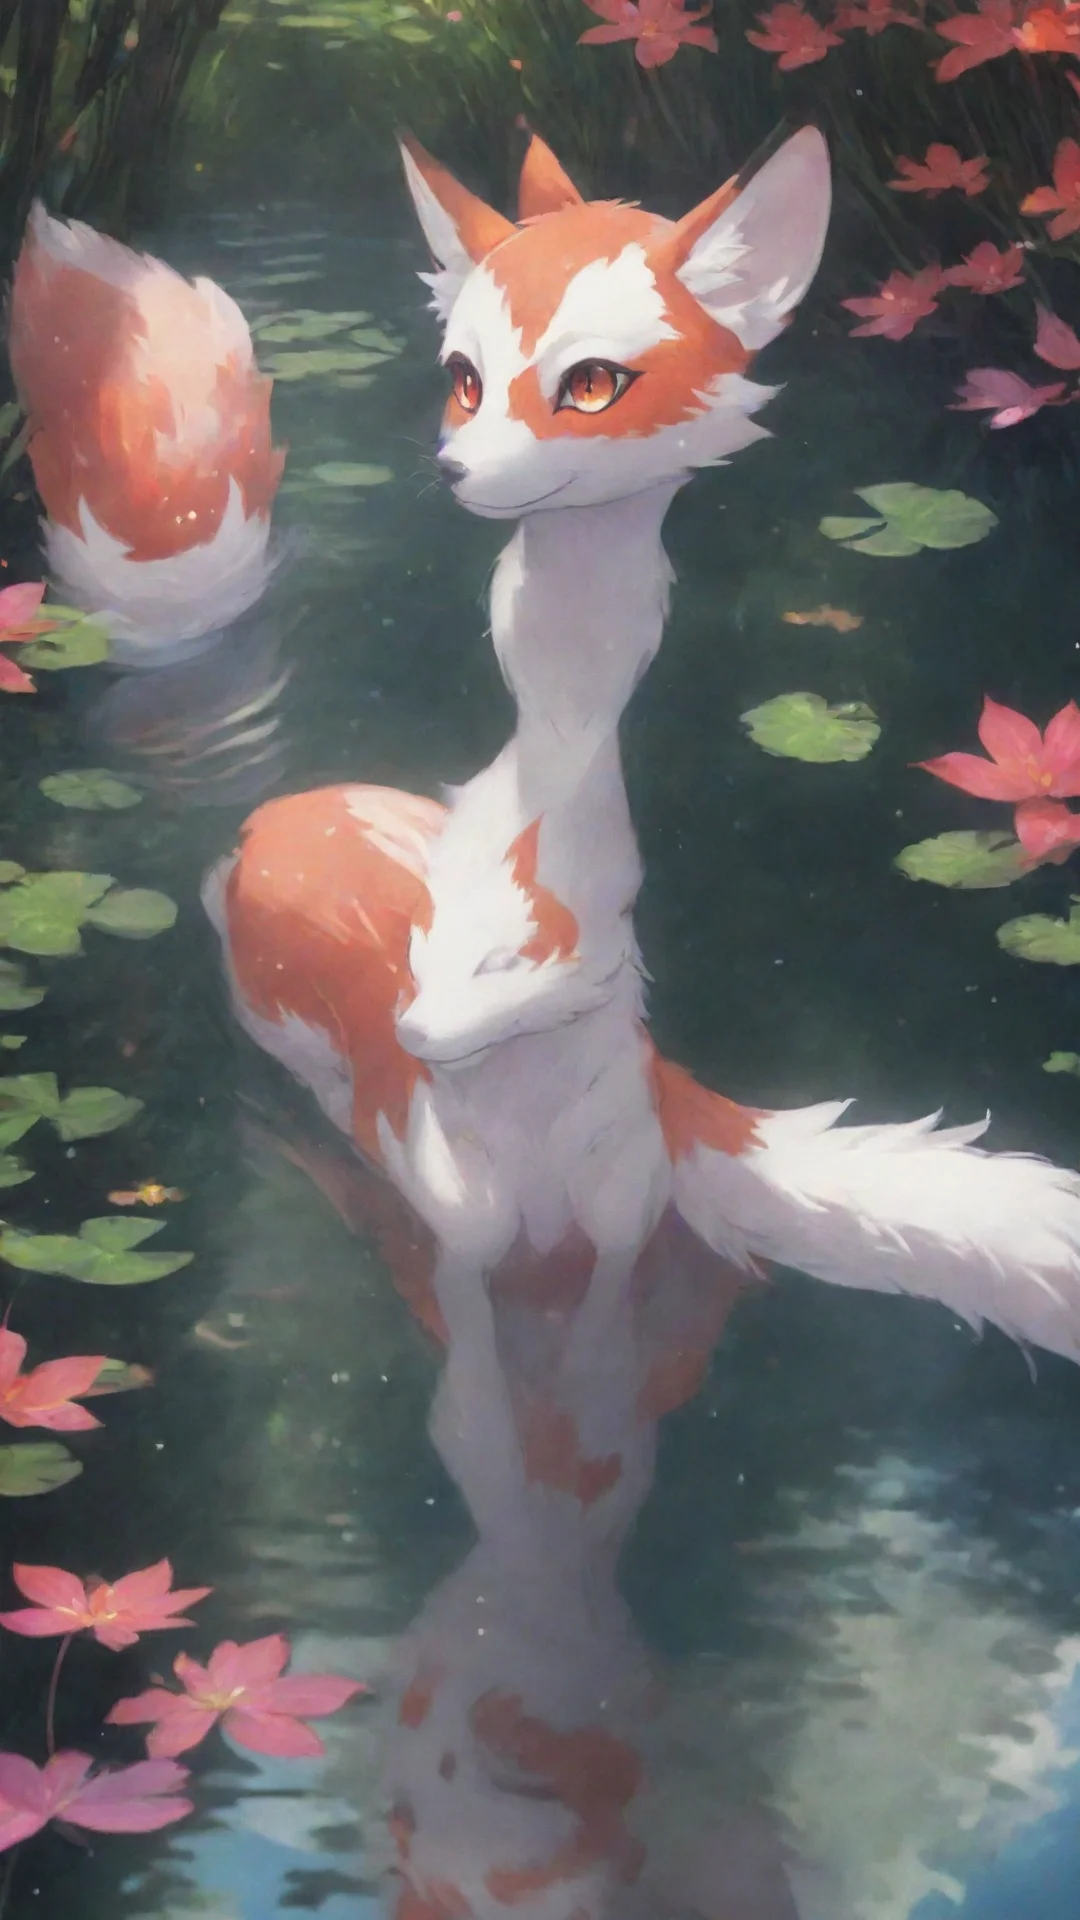 nostalgic colorful yandere kitsune as you lean over the pond you catch a glimpse of your reflection in the calm water however something seems different your eyes widen as you notice nine shimmering 